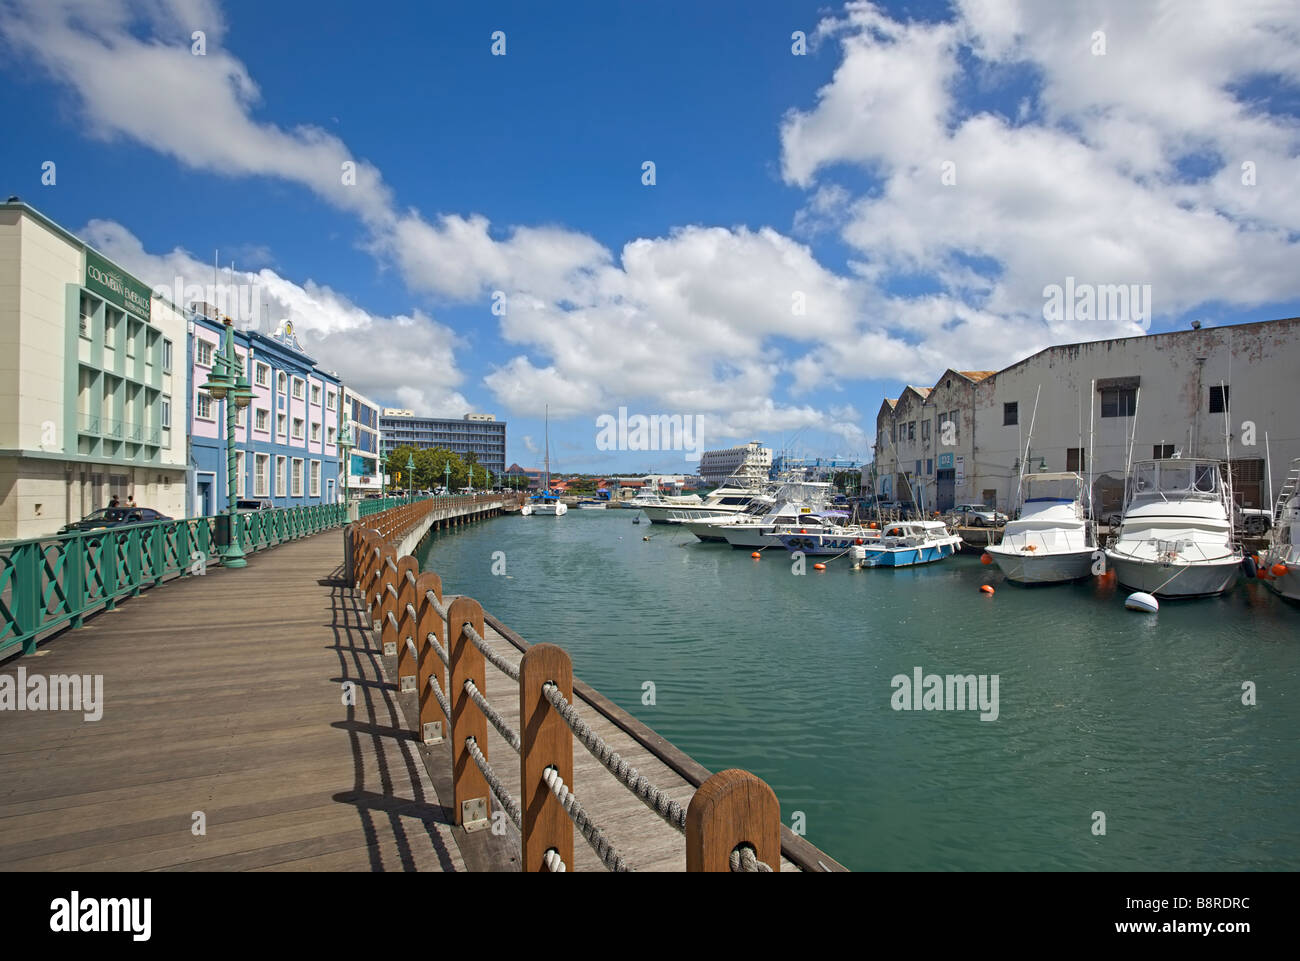 View of Barbados waterfront and boardwalk in Bridgetown, Barbados, "St. Michael" Stock Photo